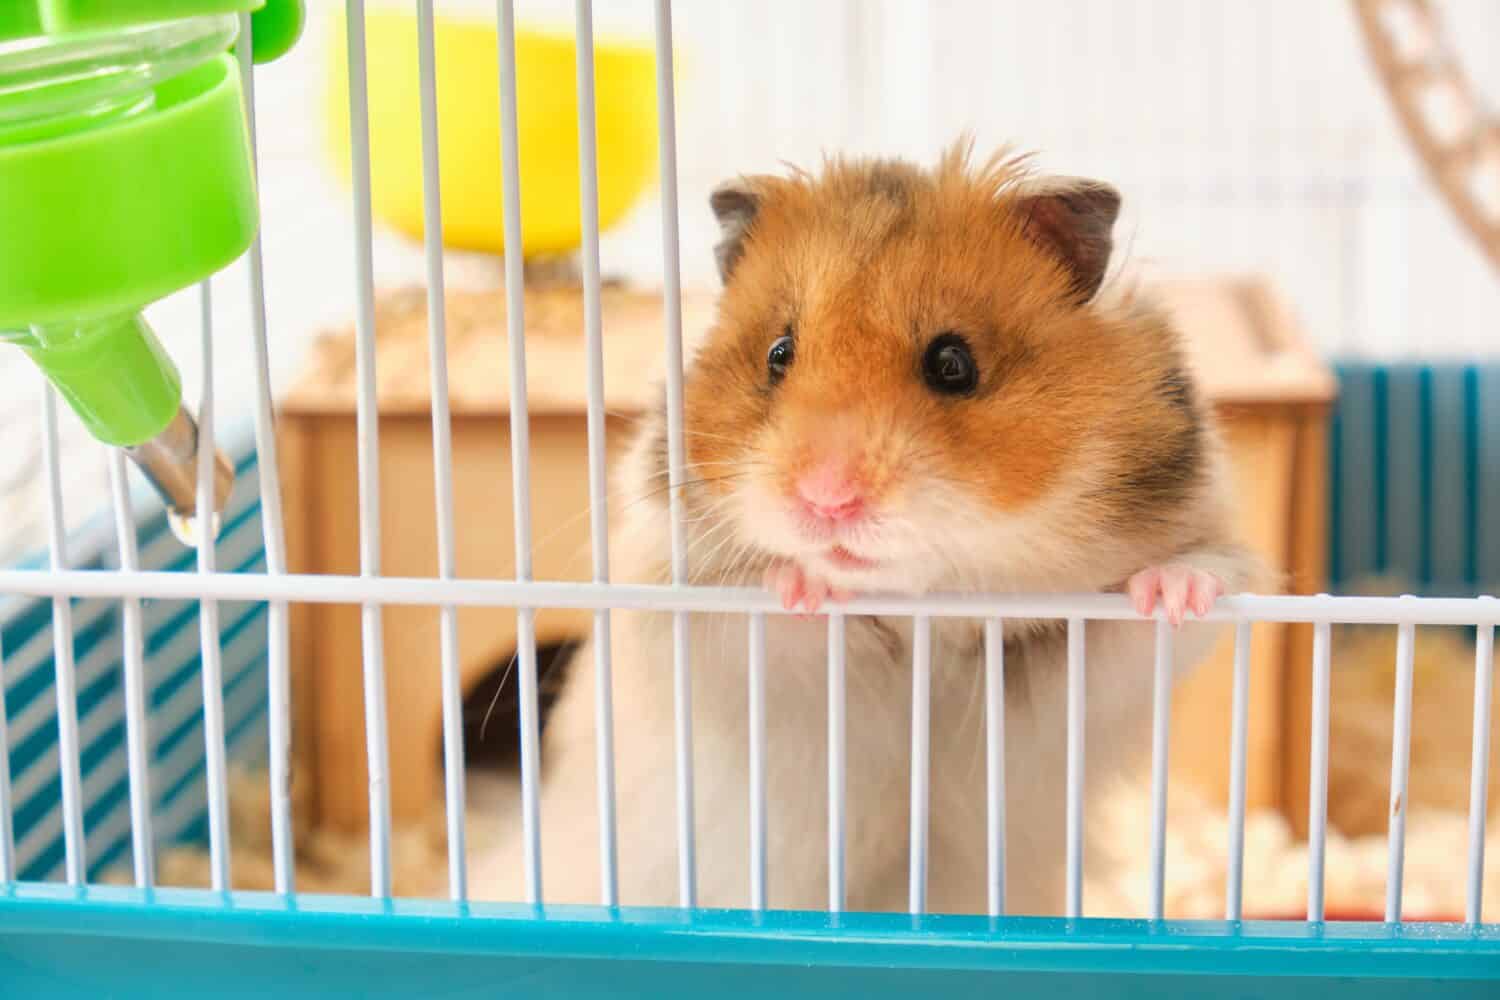 cute fluffy tricolor long haired syrian hamster peeking out of the cage slective focus